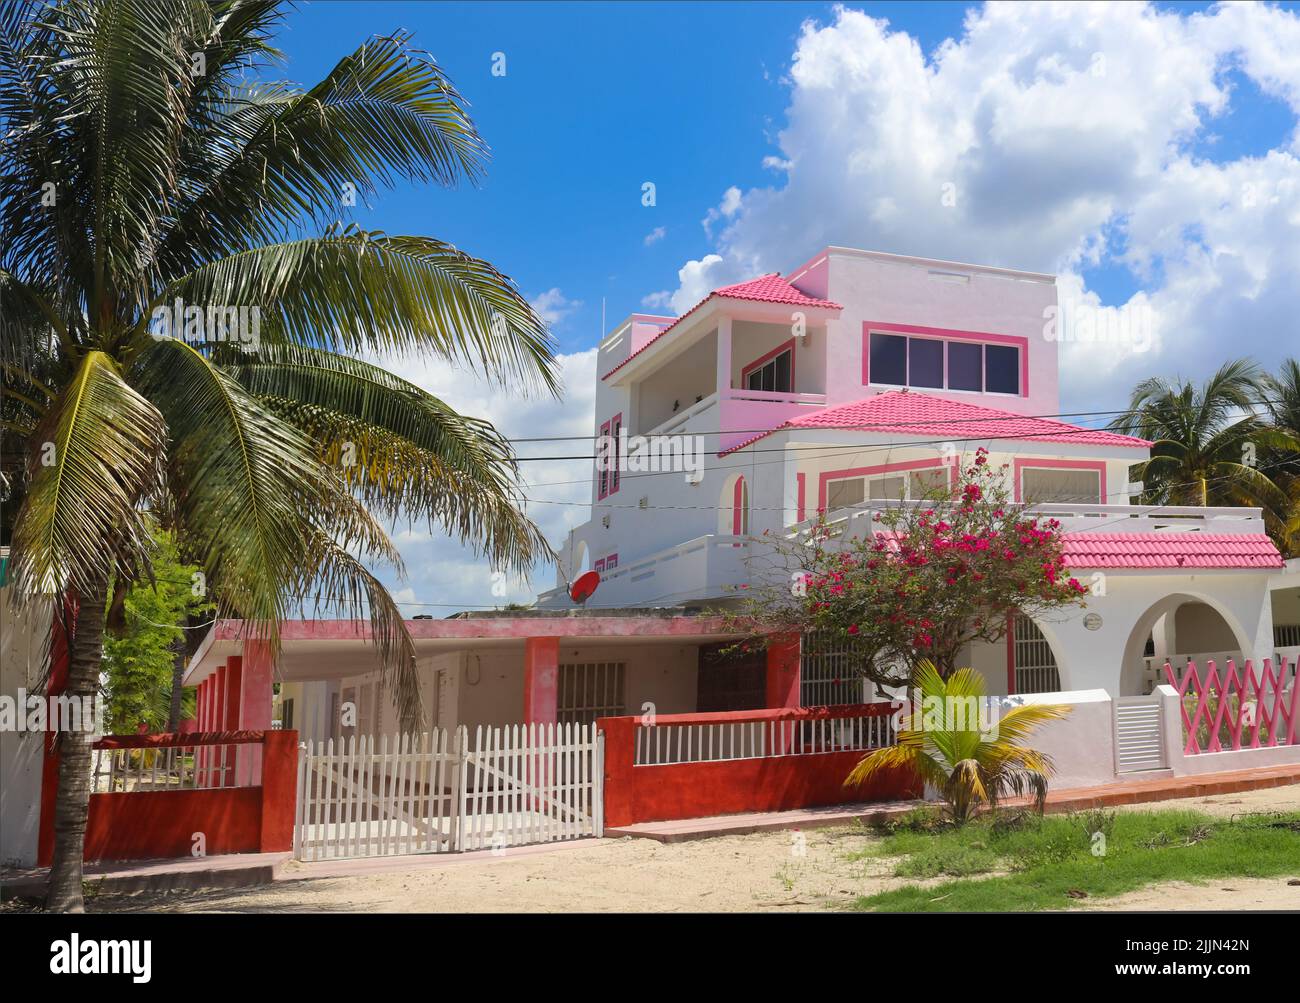 Cute pink and white Mexican three story house with red fence and palm and flowering trees against a beautiful blue sky with fluffy clouds Stock Photo